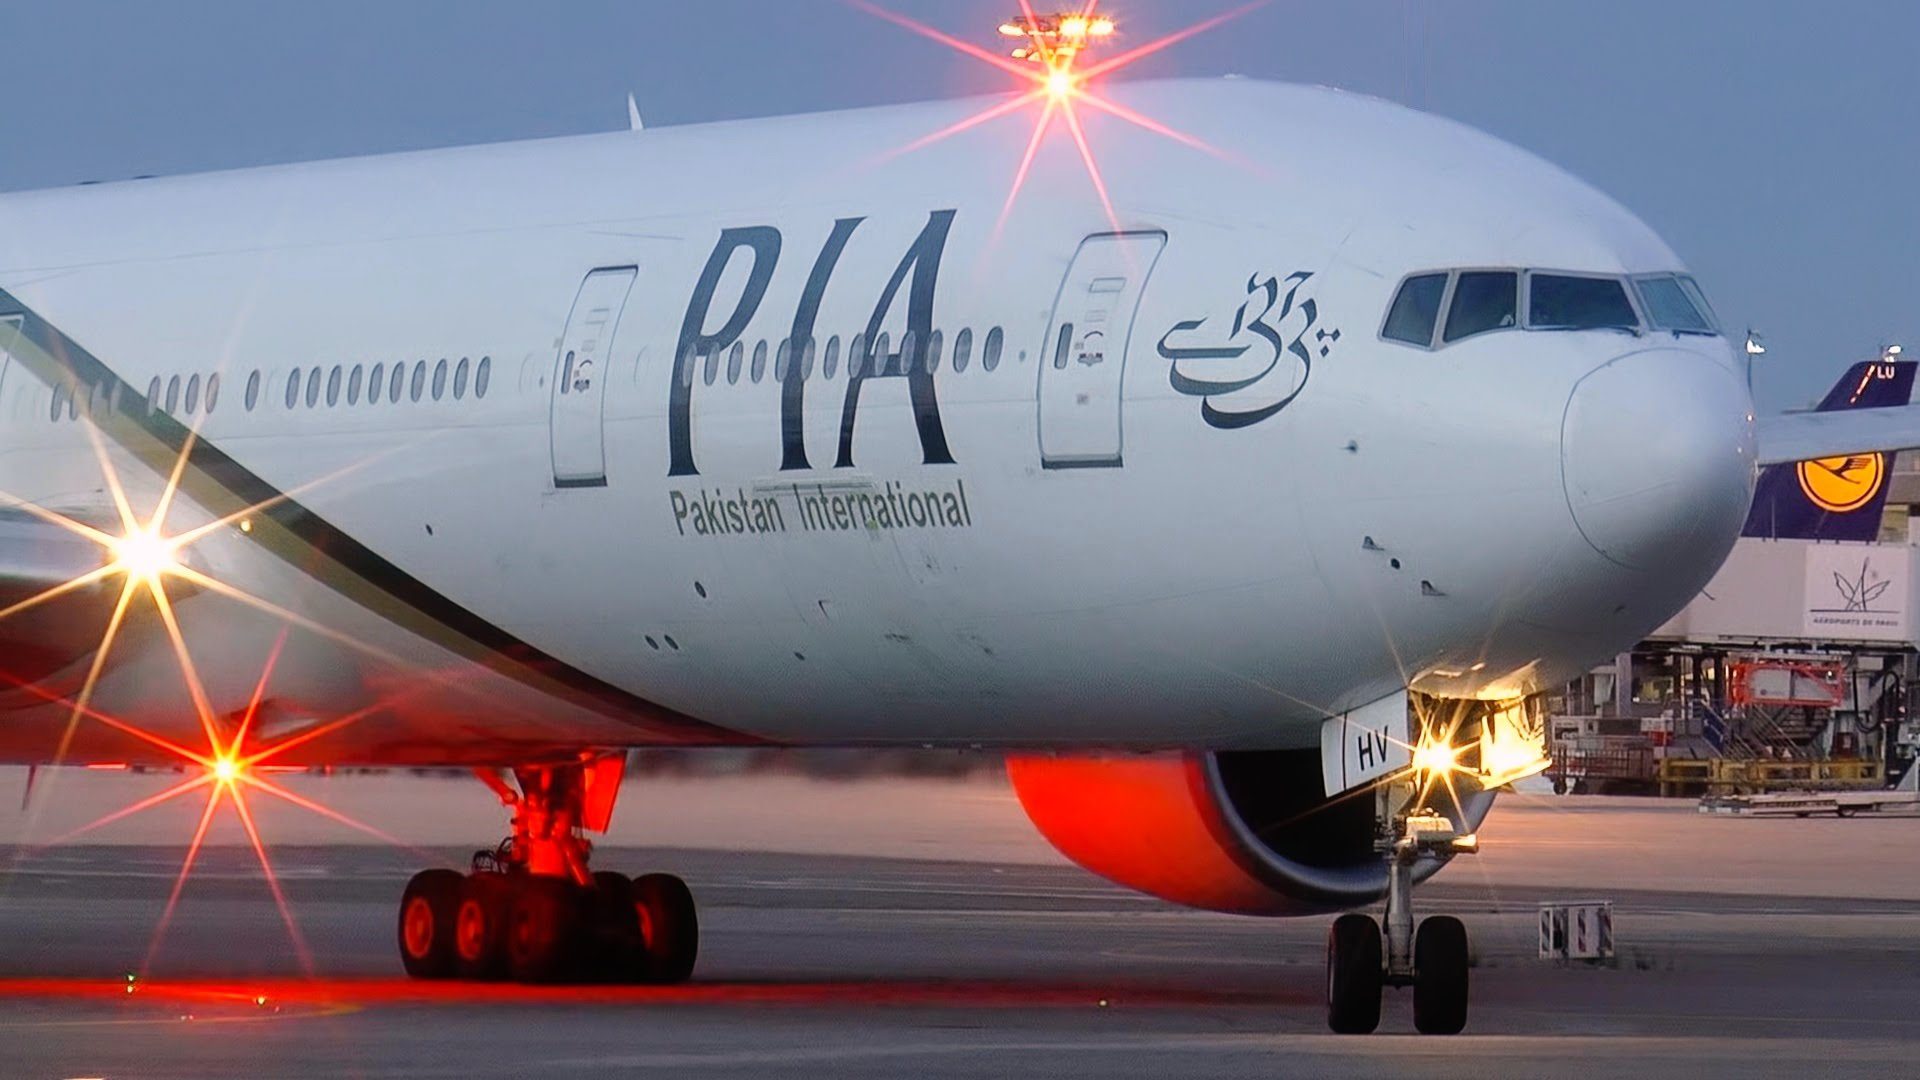 PIA has its engines revved to deliver wow-factor to its customers